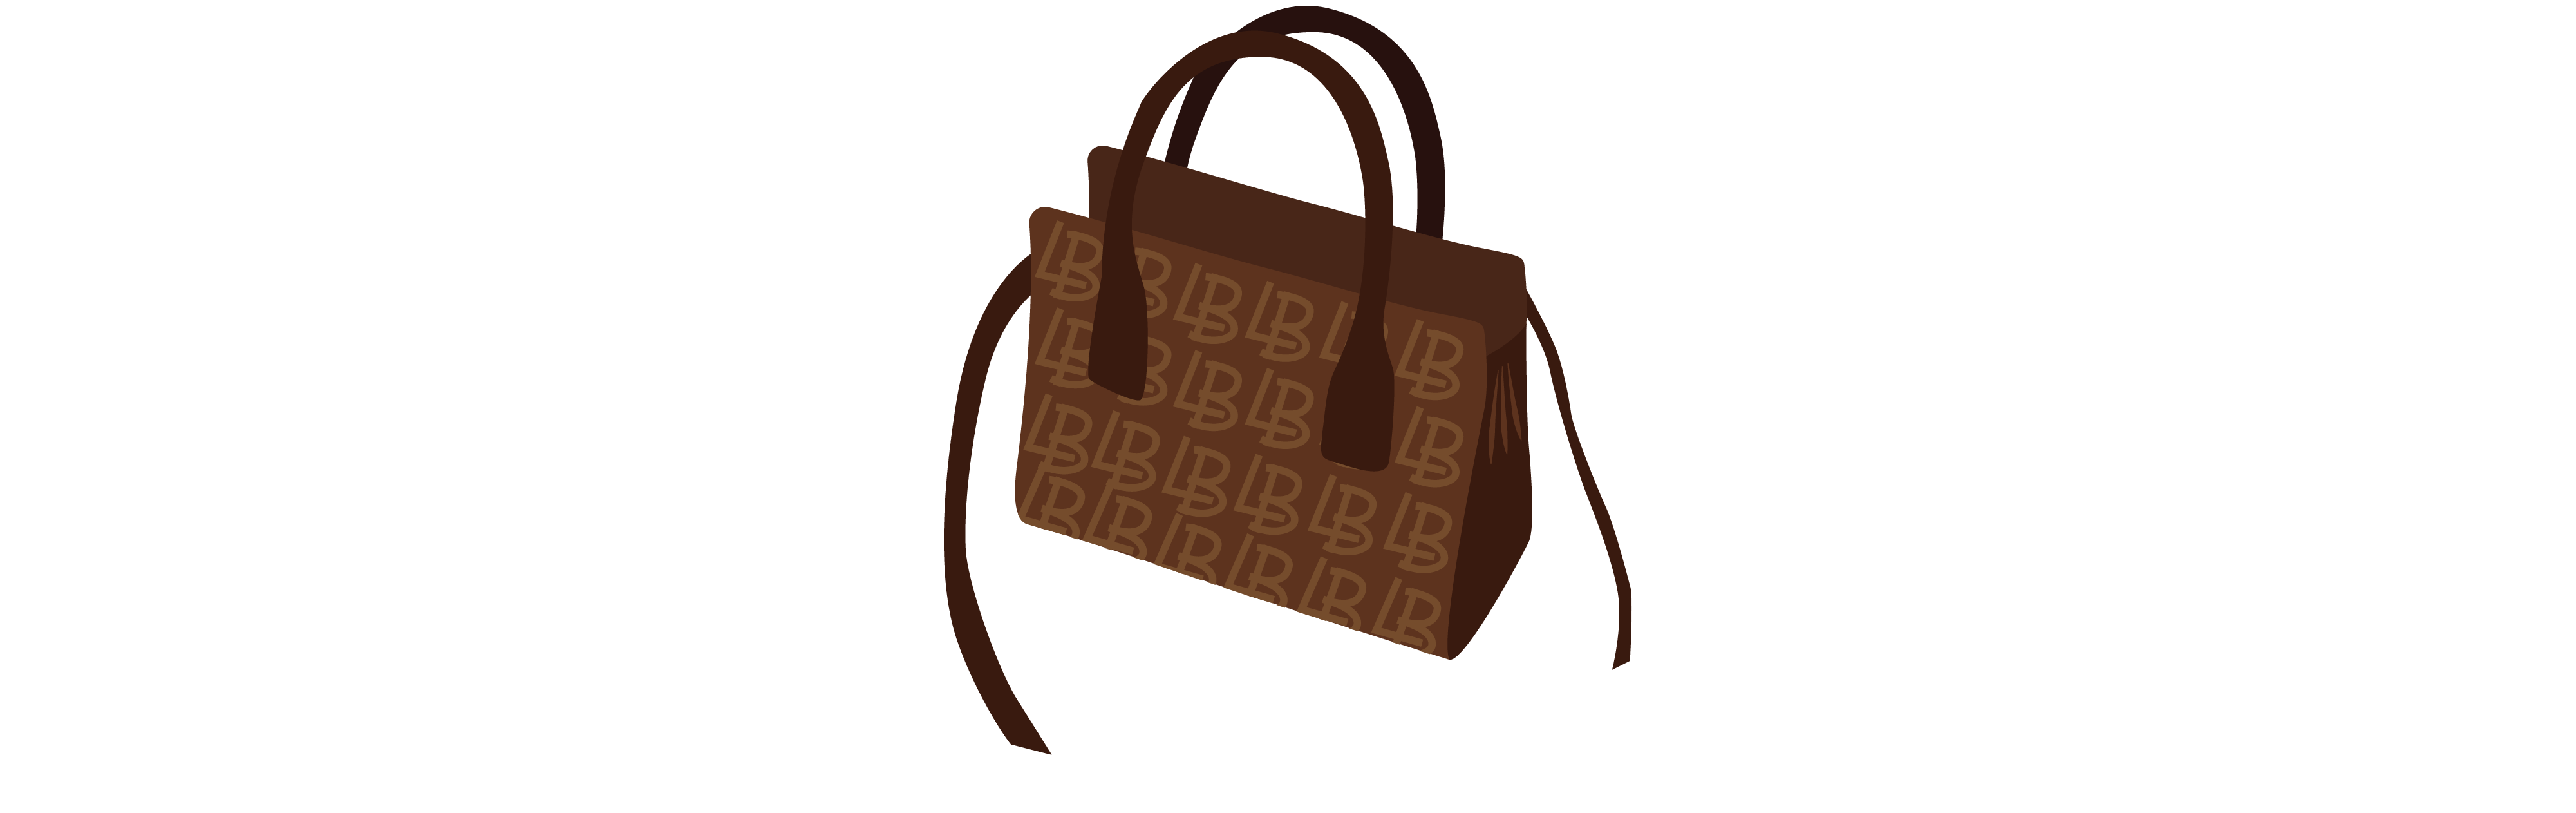 A brown handbag with light brown icons with the letters L and B patterned around it sits on a surface. A long, dark brown shoulder strap sits around it and shorter handles sit on top of the bag near the opening.